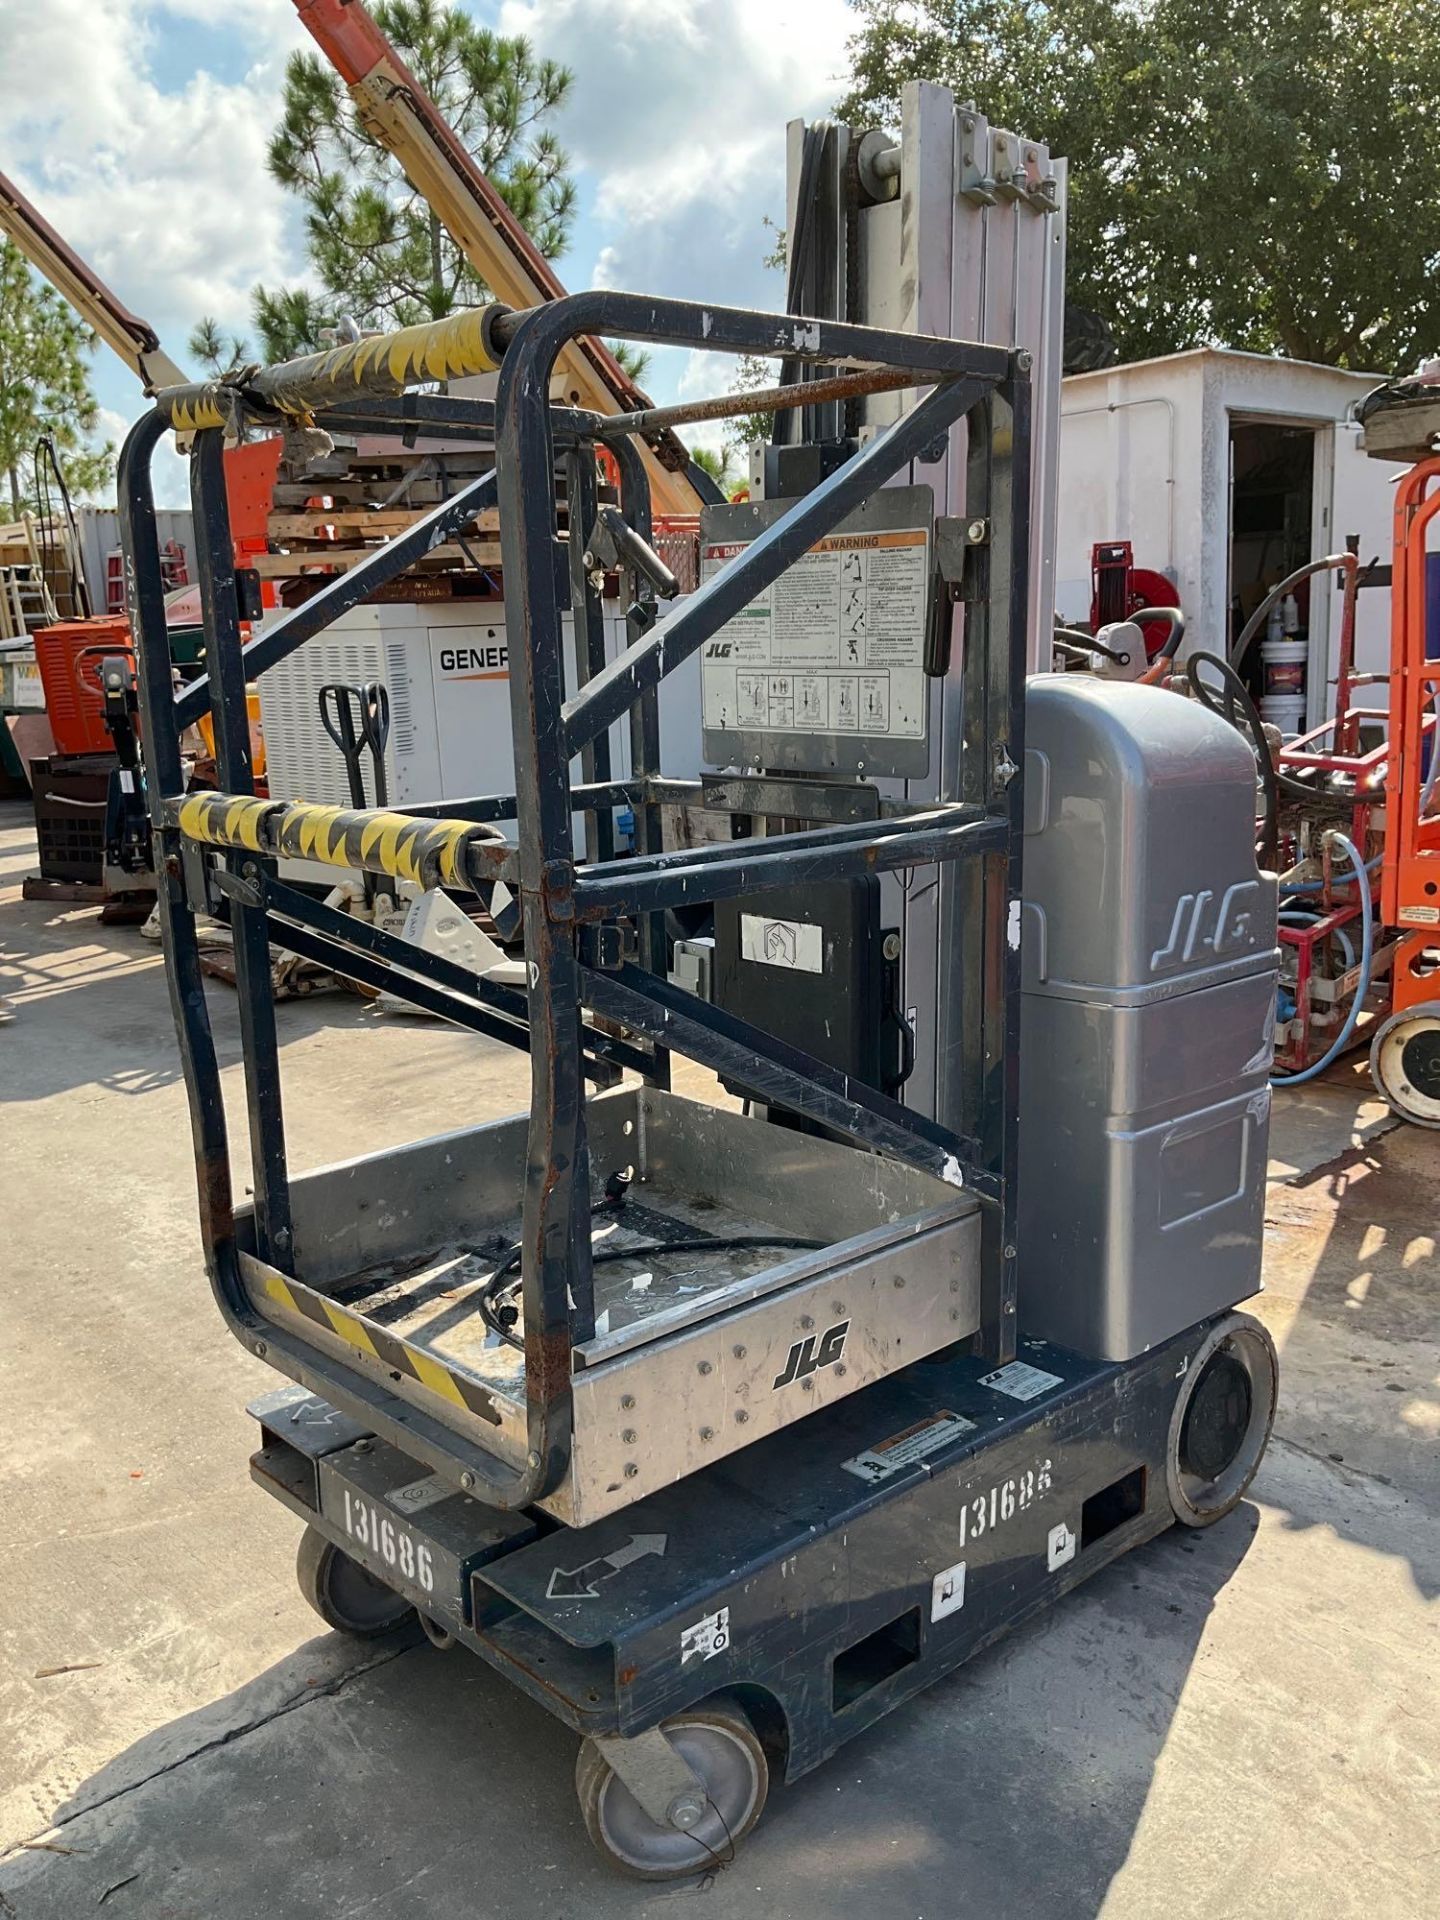 JLG MANLIFT MODEL 20MVL, ELECTRIC, APPROX MAX PLATFORM HEIGHT 20FT, NON MARKING TIRES, BUILT IN - Image 10 of 10